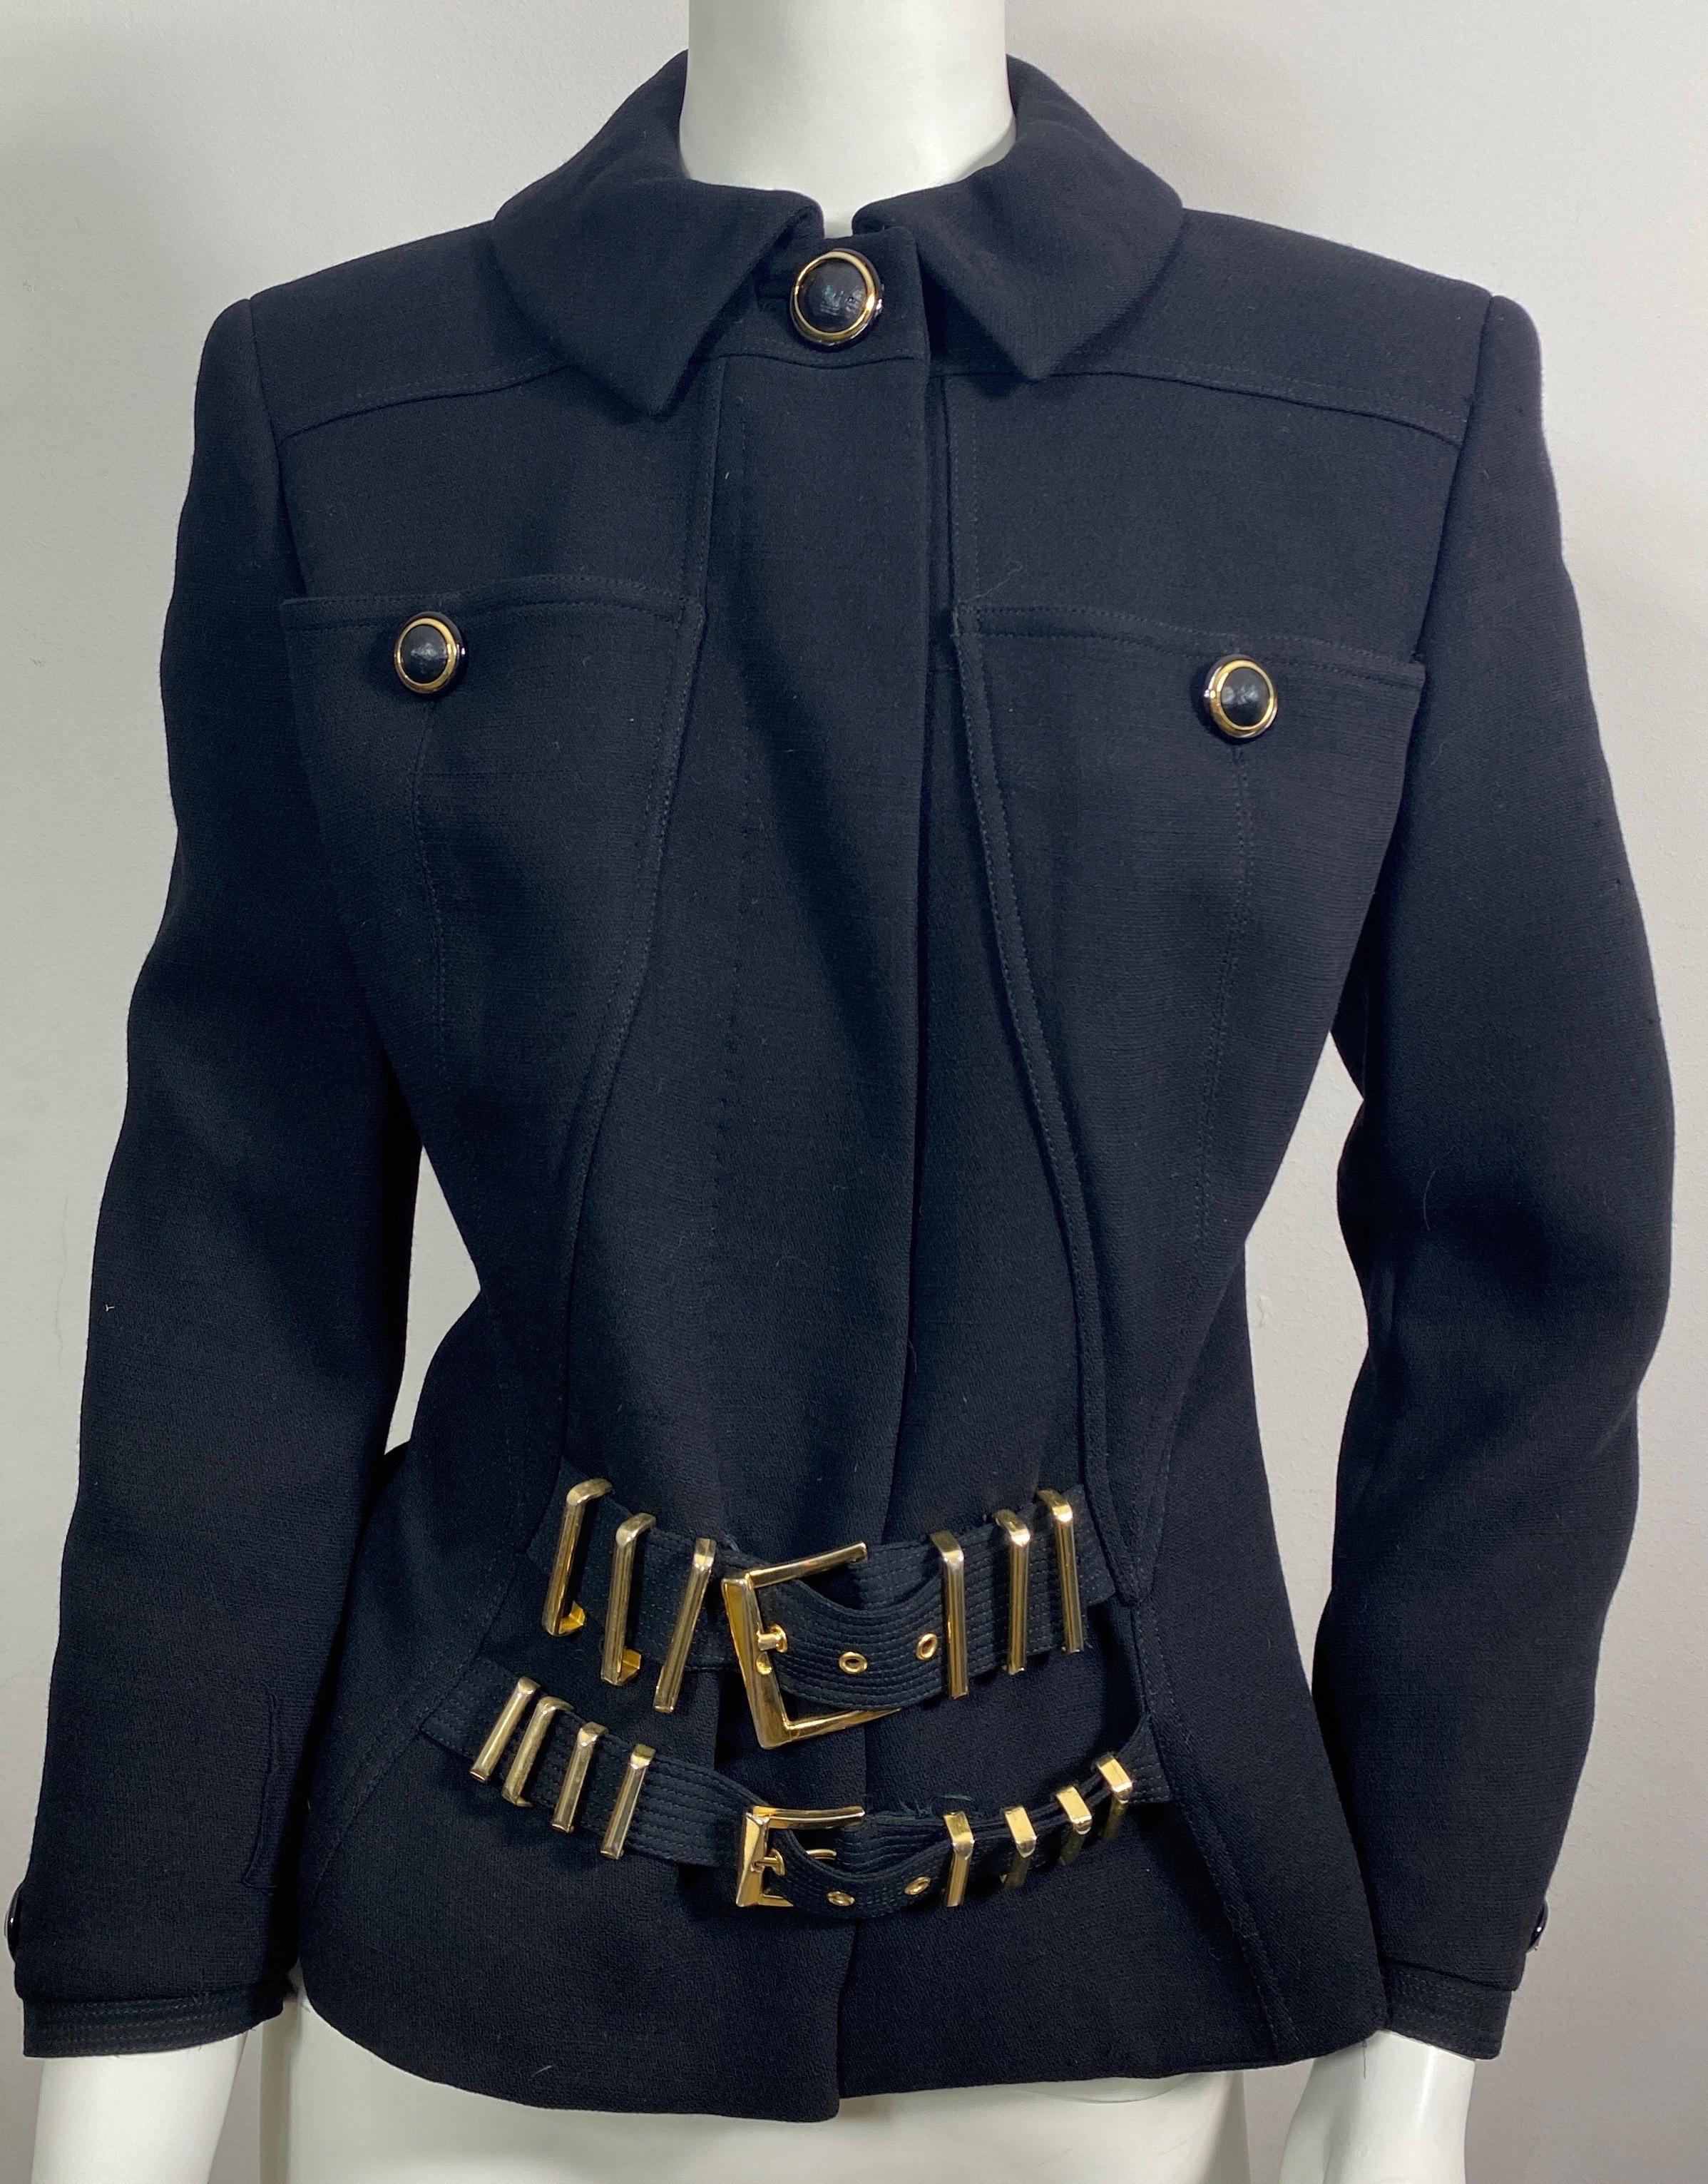 Gianni Versace Couture F/W 1992 Runway S&M Bondage Black Jacket-Size 6 In Good Condition For Sale In West Palm Beach, FL